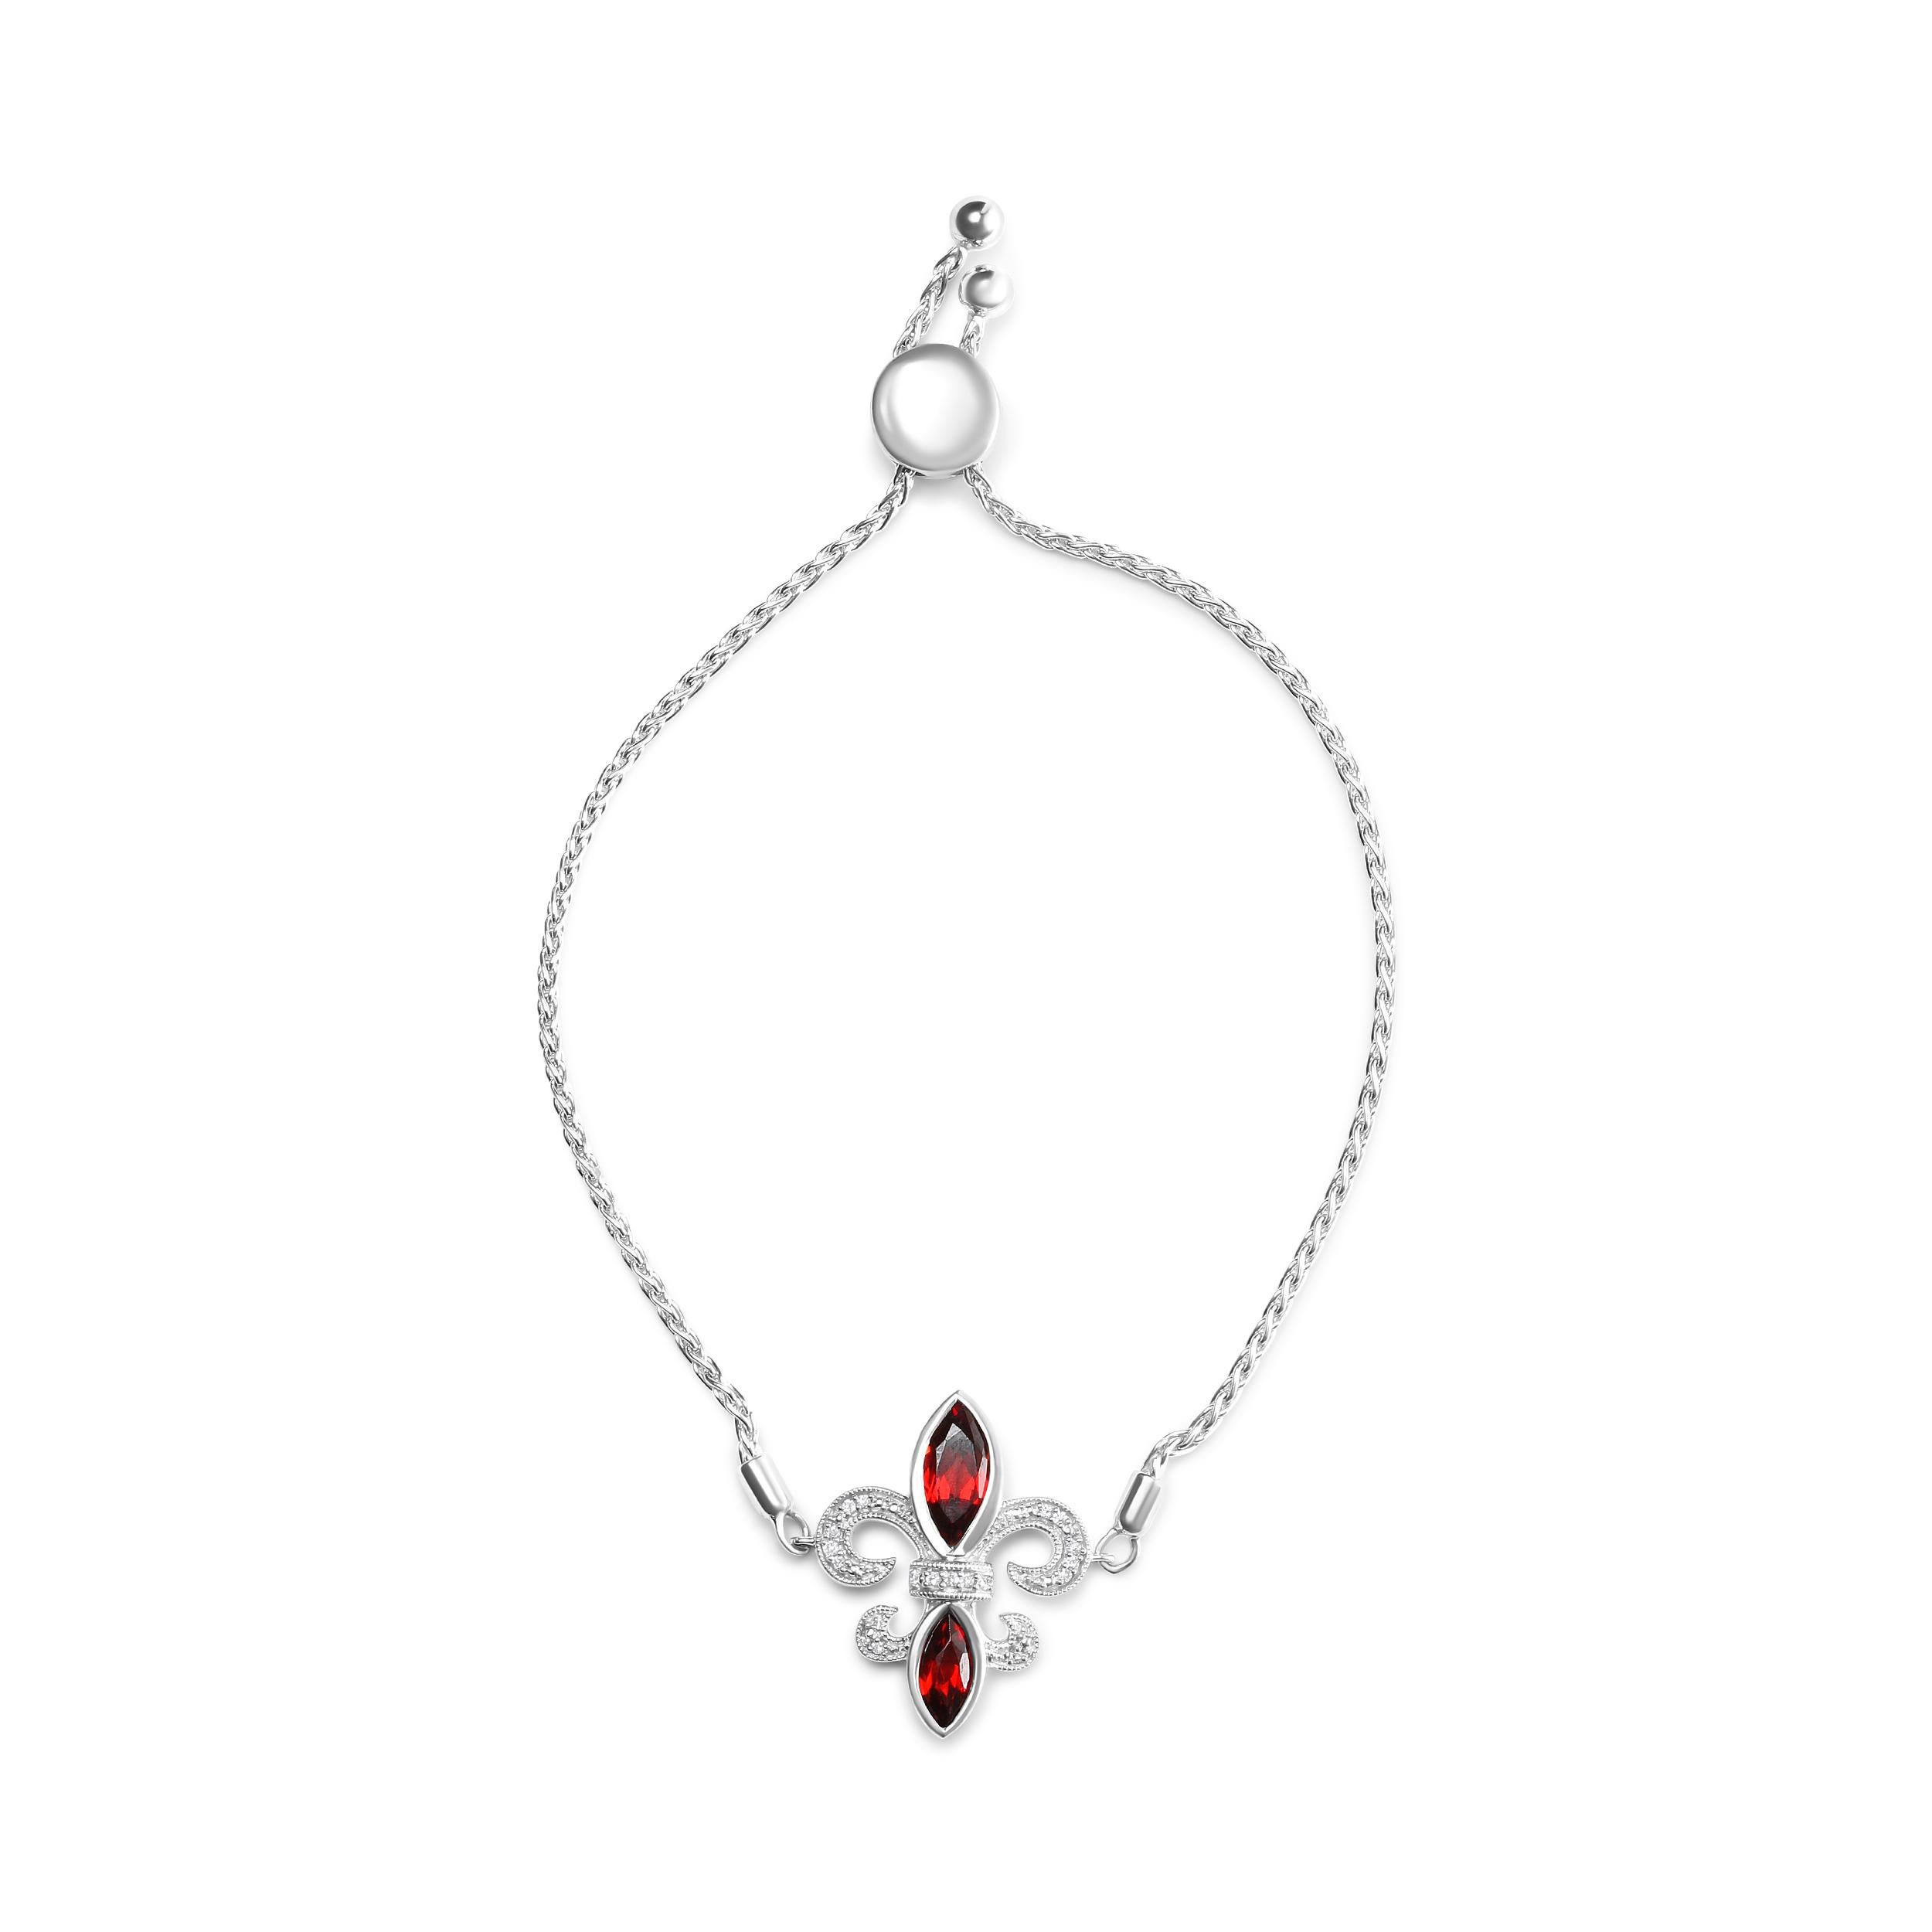 Step into a world of luxurious beauty with our stunning .925 Sterling Silver Marquise Garnet and Diamond Accent Lariat Bolo Bracelet. This bracelet is made for the bold and the beautiful, who want to make a statement with their jewelry. The gorgeous